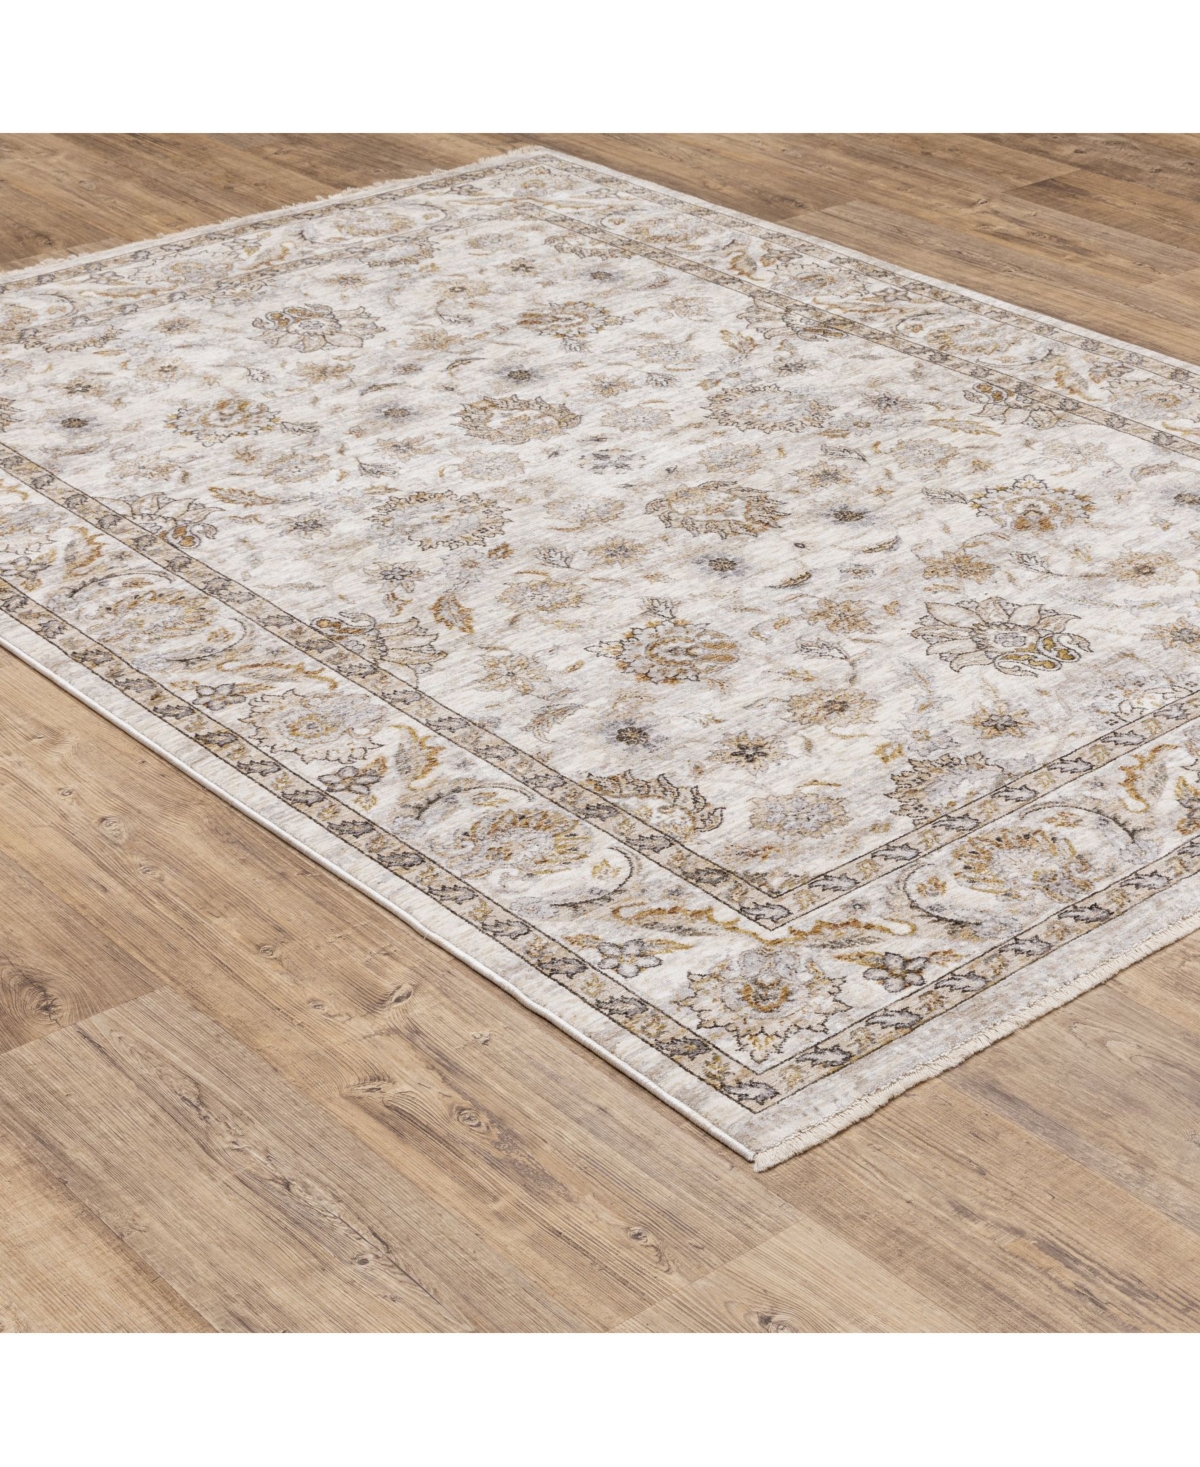 Shop Jhb Design S Kumar Kum03 Ivory And Gray 7'10" X 10'10" Area Rug In Ivory,gray